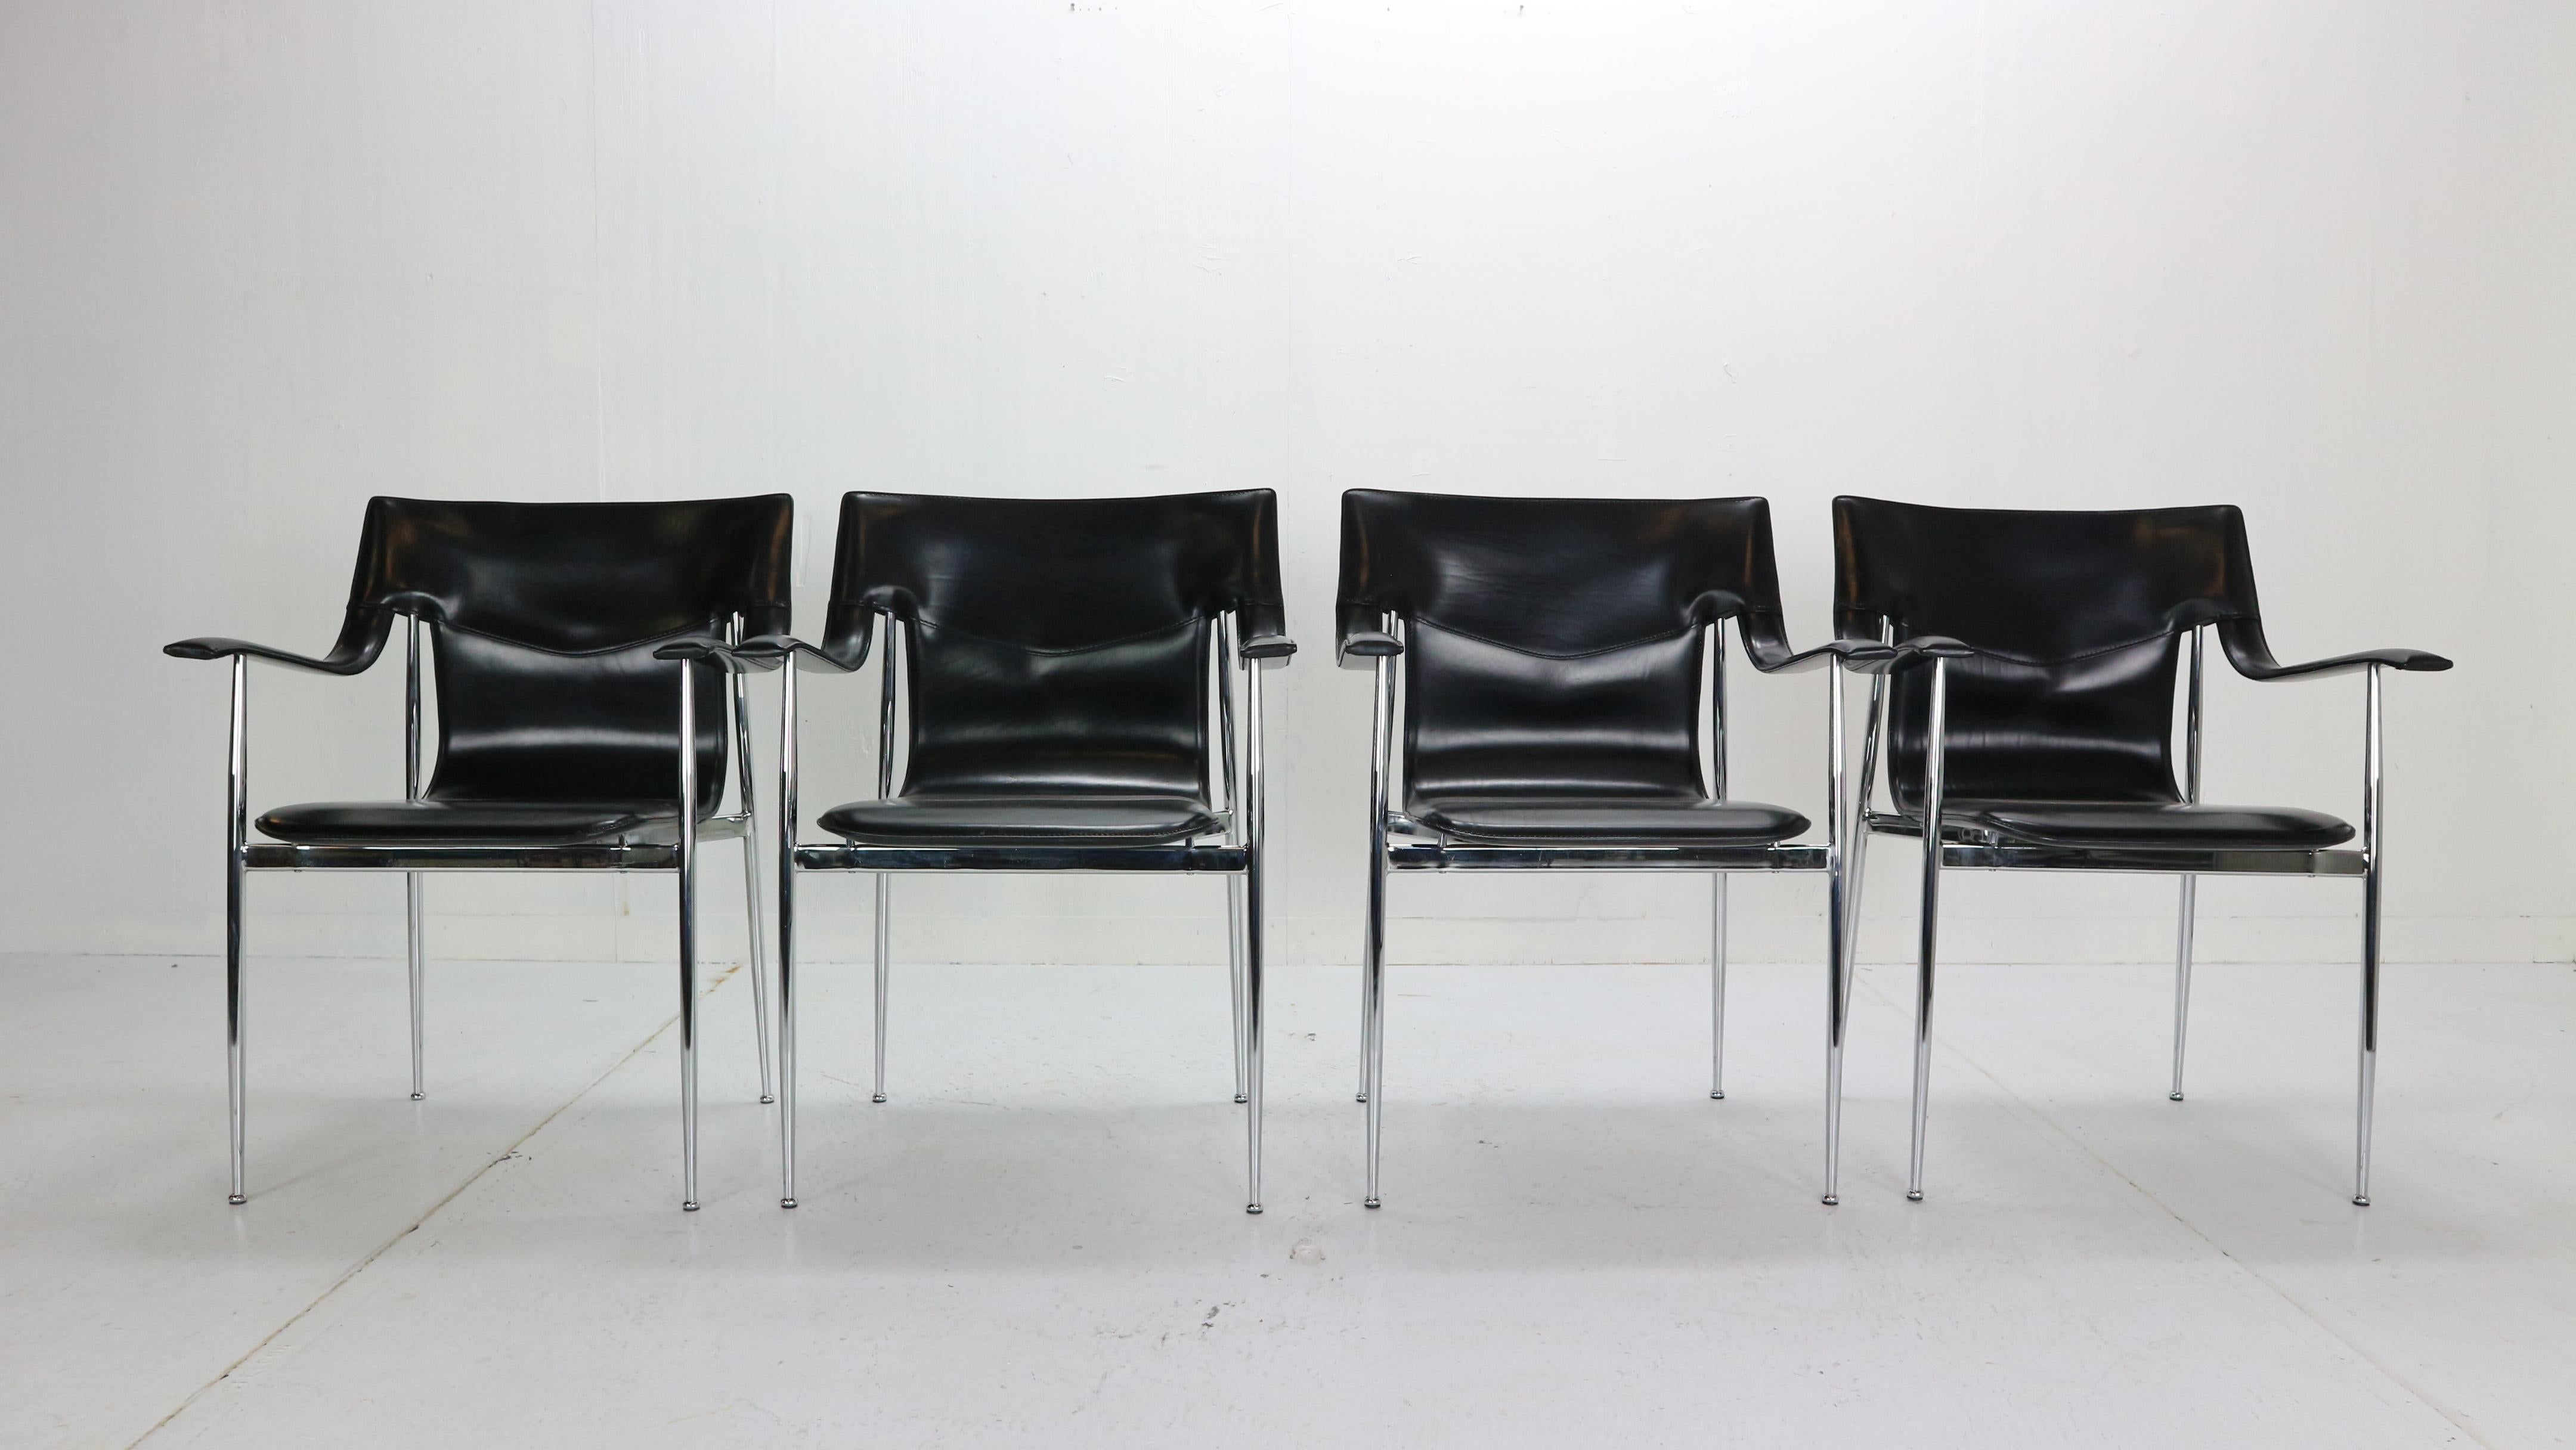 Set of four original dining room chairs by Giancarlo Vegni & Gianfranco Gualtierotti for Fasem. Italian design of the 1980s.
Item features black stitched saddle leather seat and armrests, tapered chrome frame and elegant thin legs, original stamp